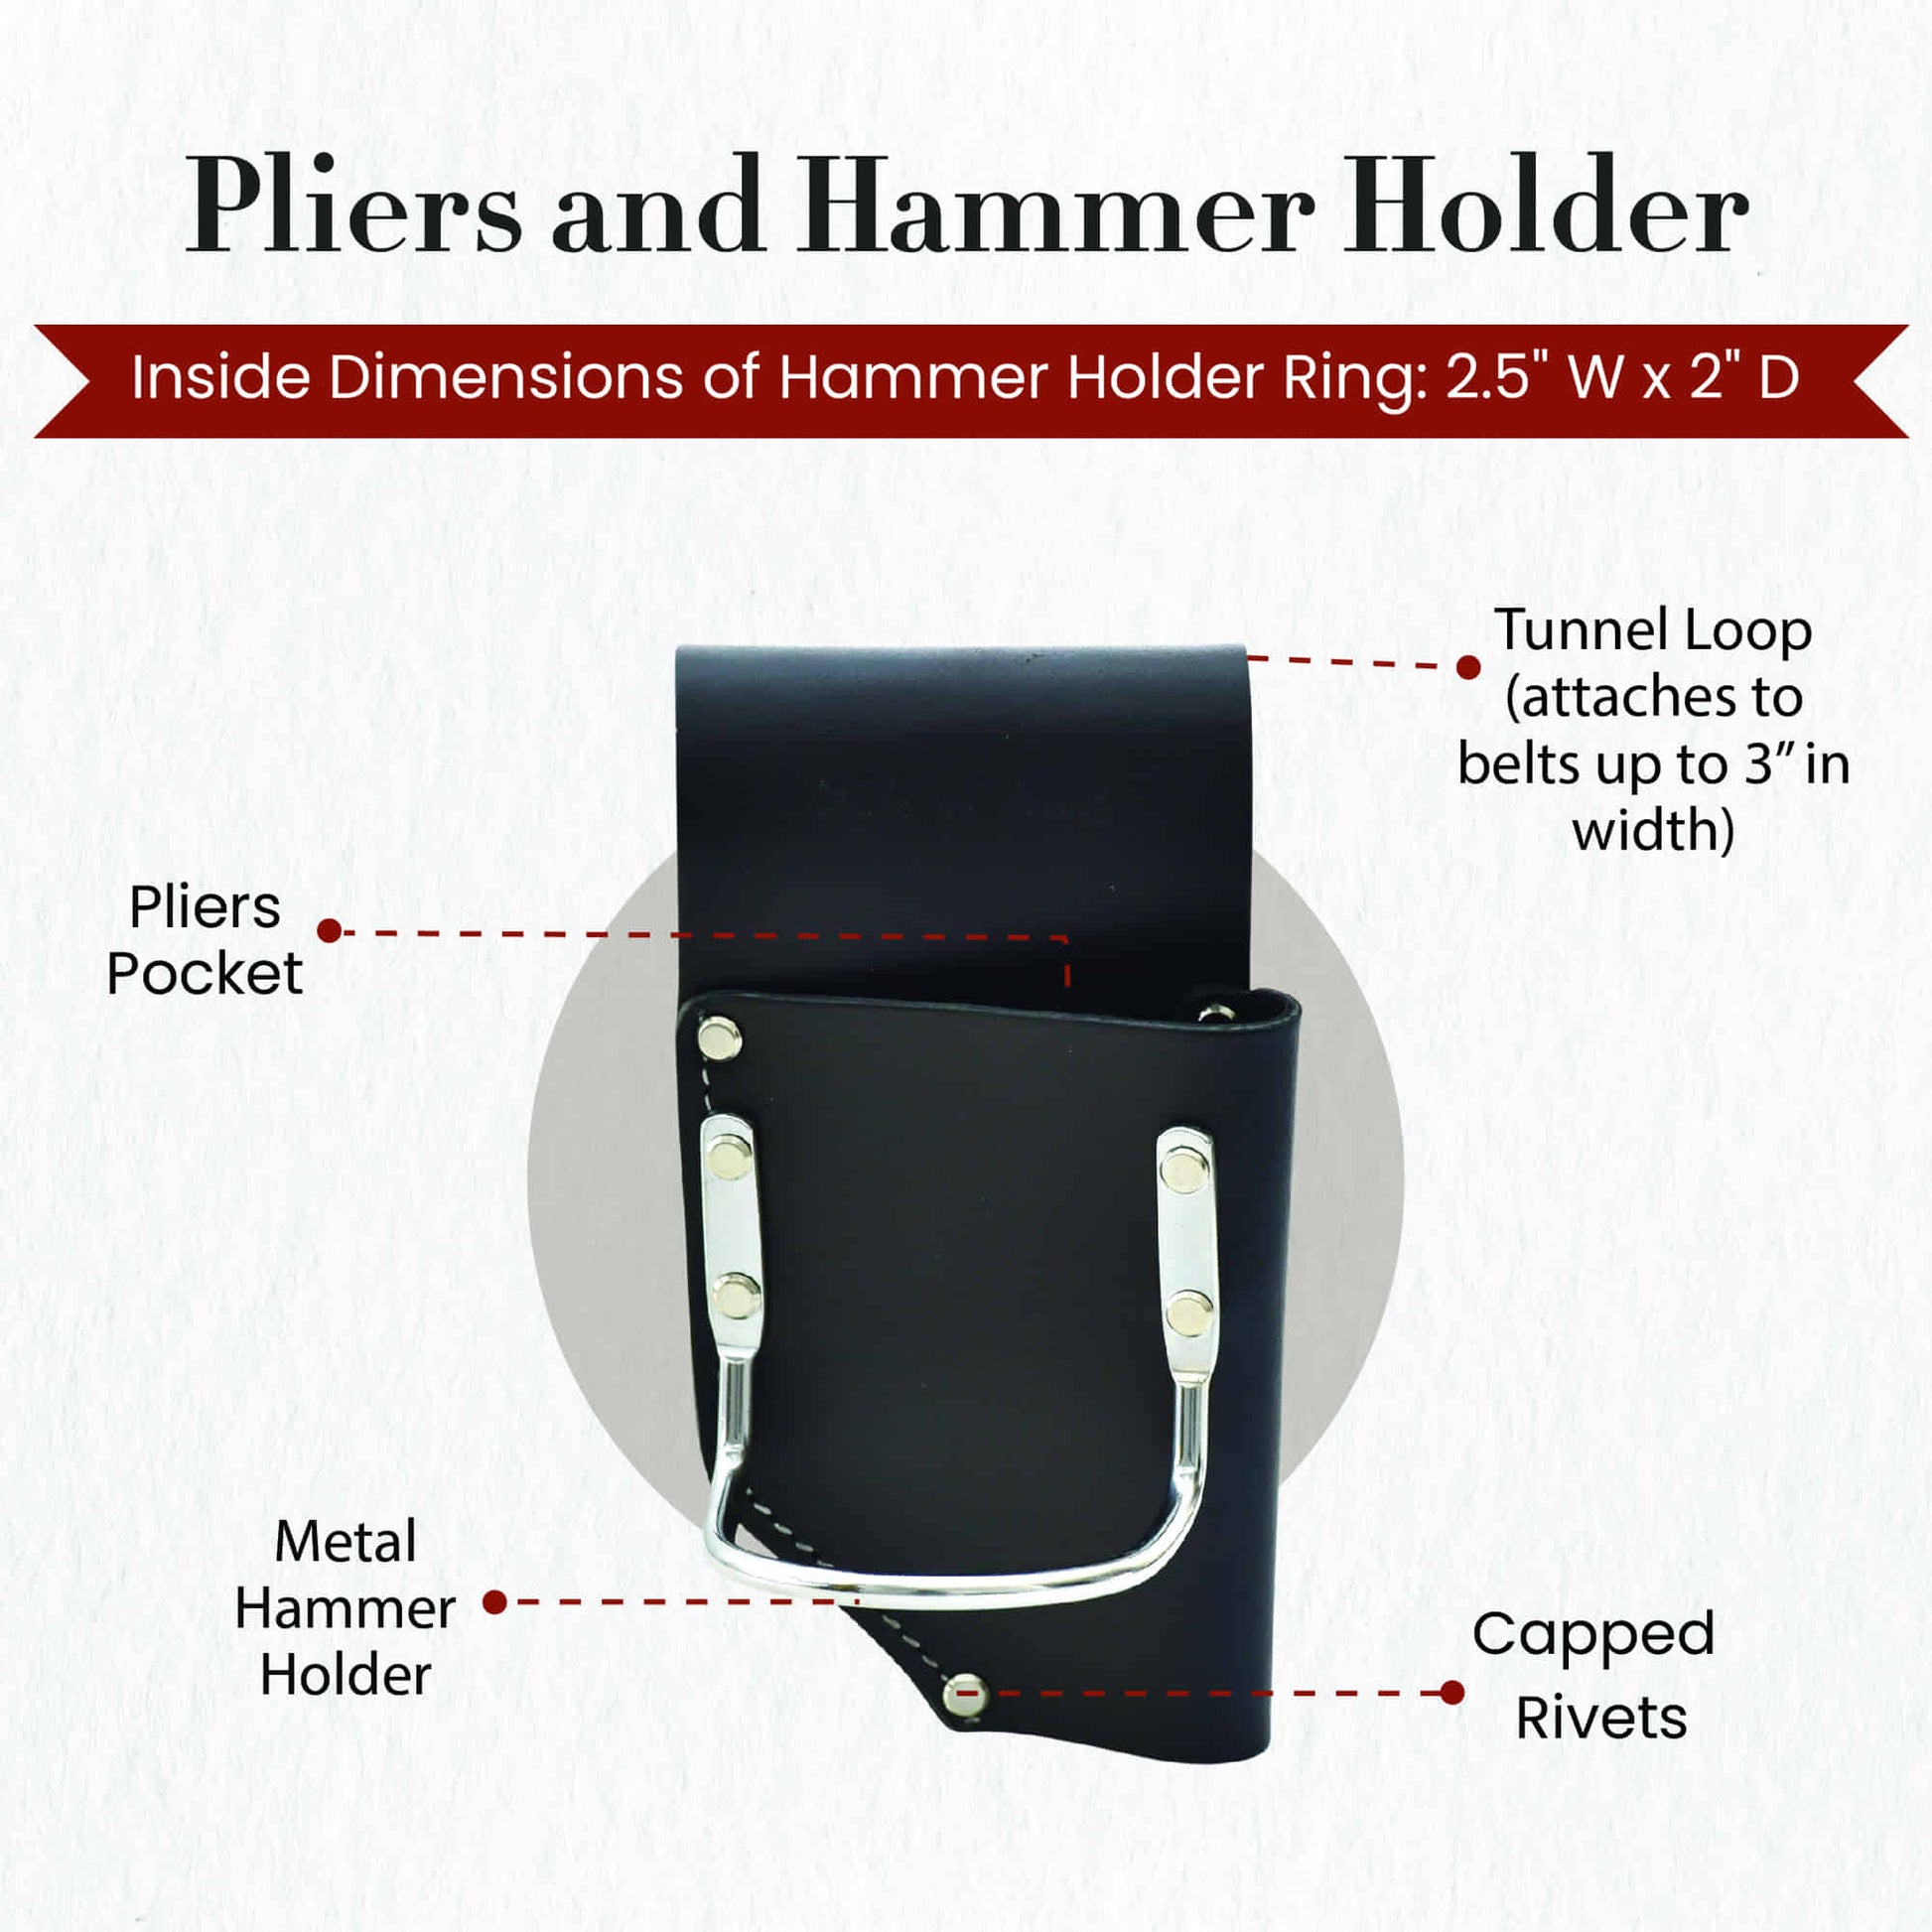 Style n Craft's 75450 - Pliers and Hammer Holder in Heavy Full Grain Leather in Black - Front View Showing the Details